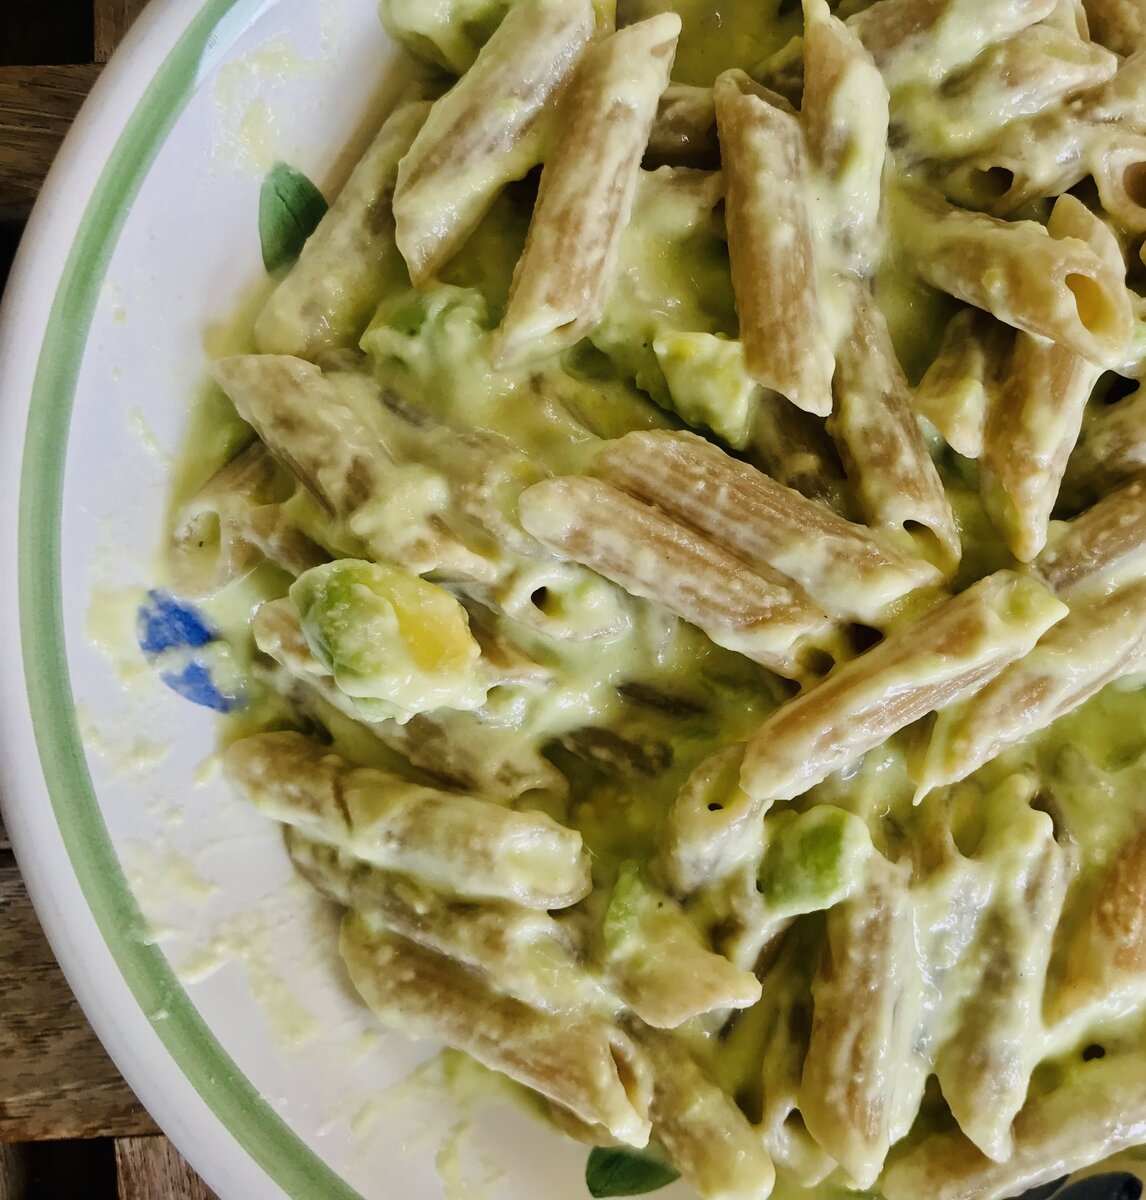 Oat penne with avocado and cheese.jpeg